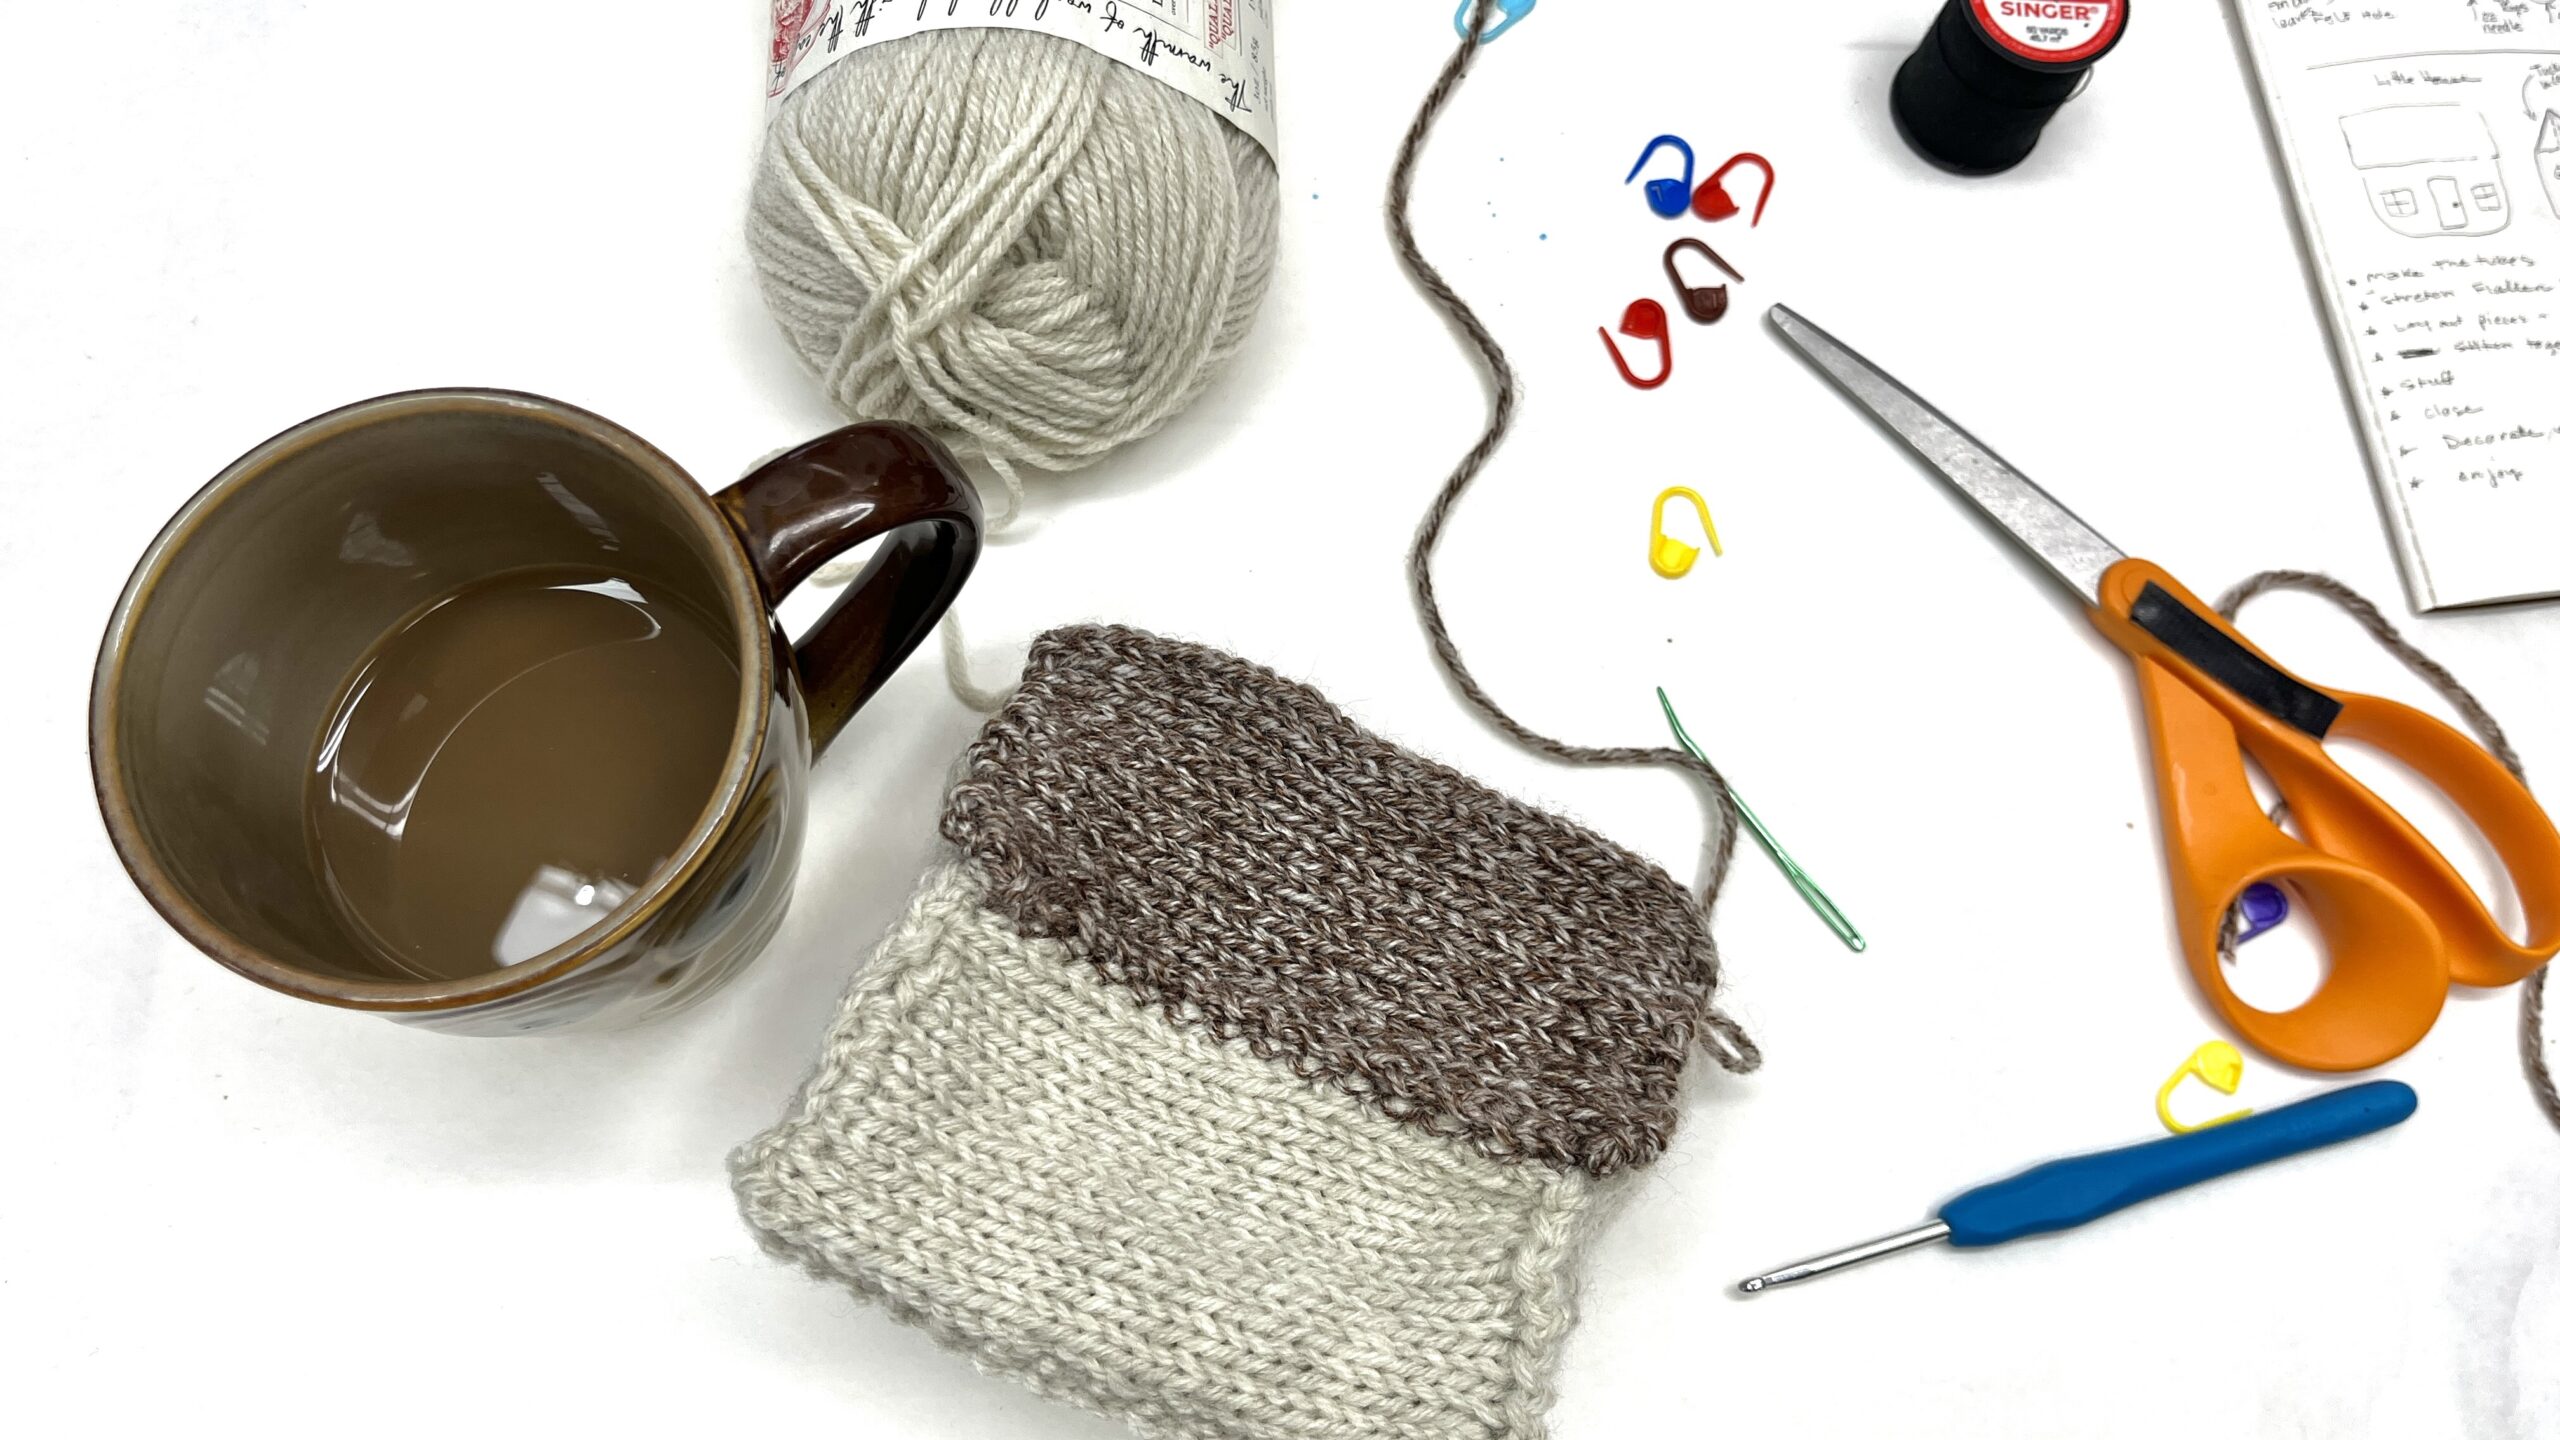 Cup of coffee on the left with a soft knitted sculpture of a thatched coastal cottage. Scattered on the table are colorful stitch markers, scissors, crochet hook and a darning needle